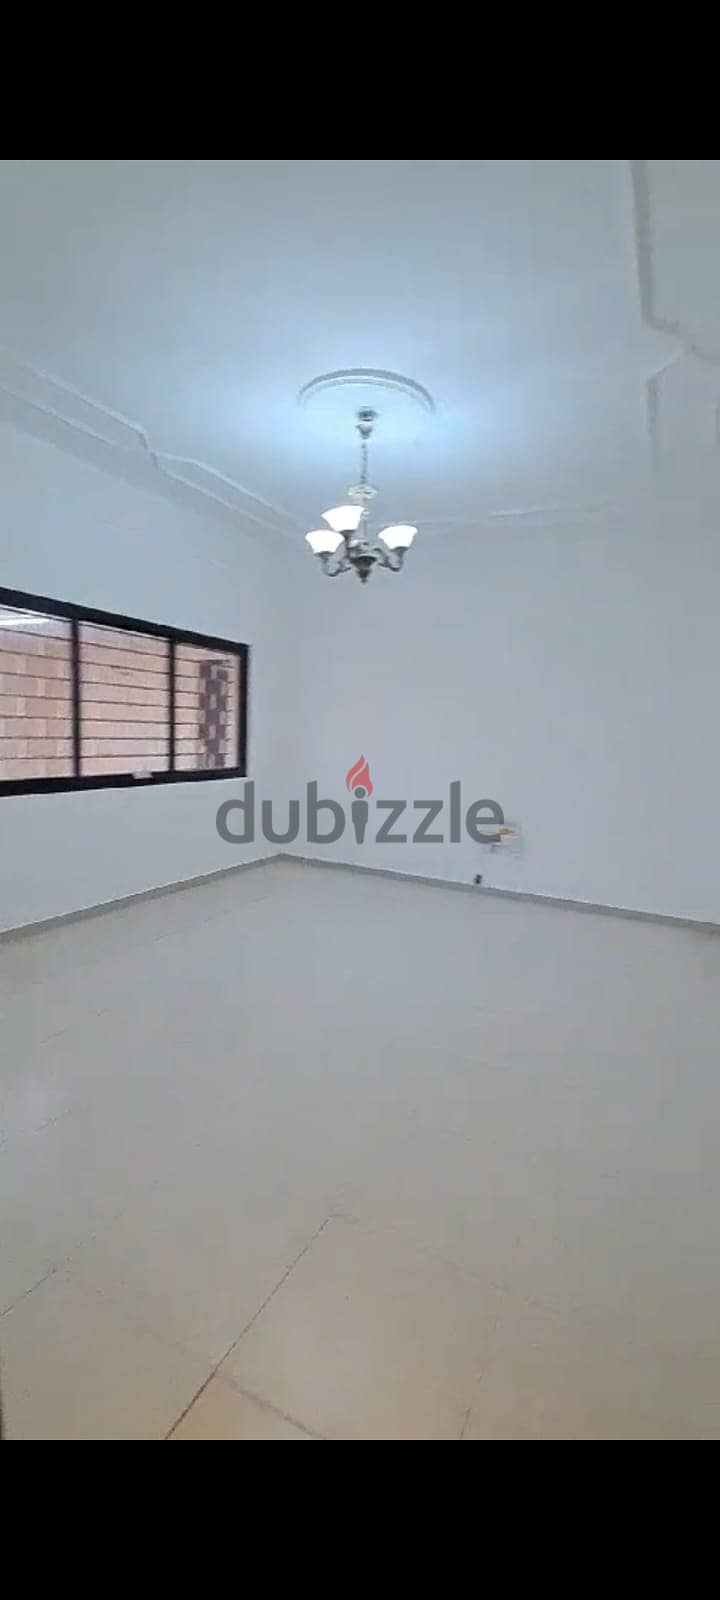 For rent flat (Ground floor apartment) in compound in Al Nasr 3bhk 10